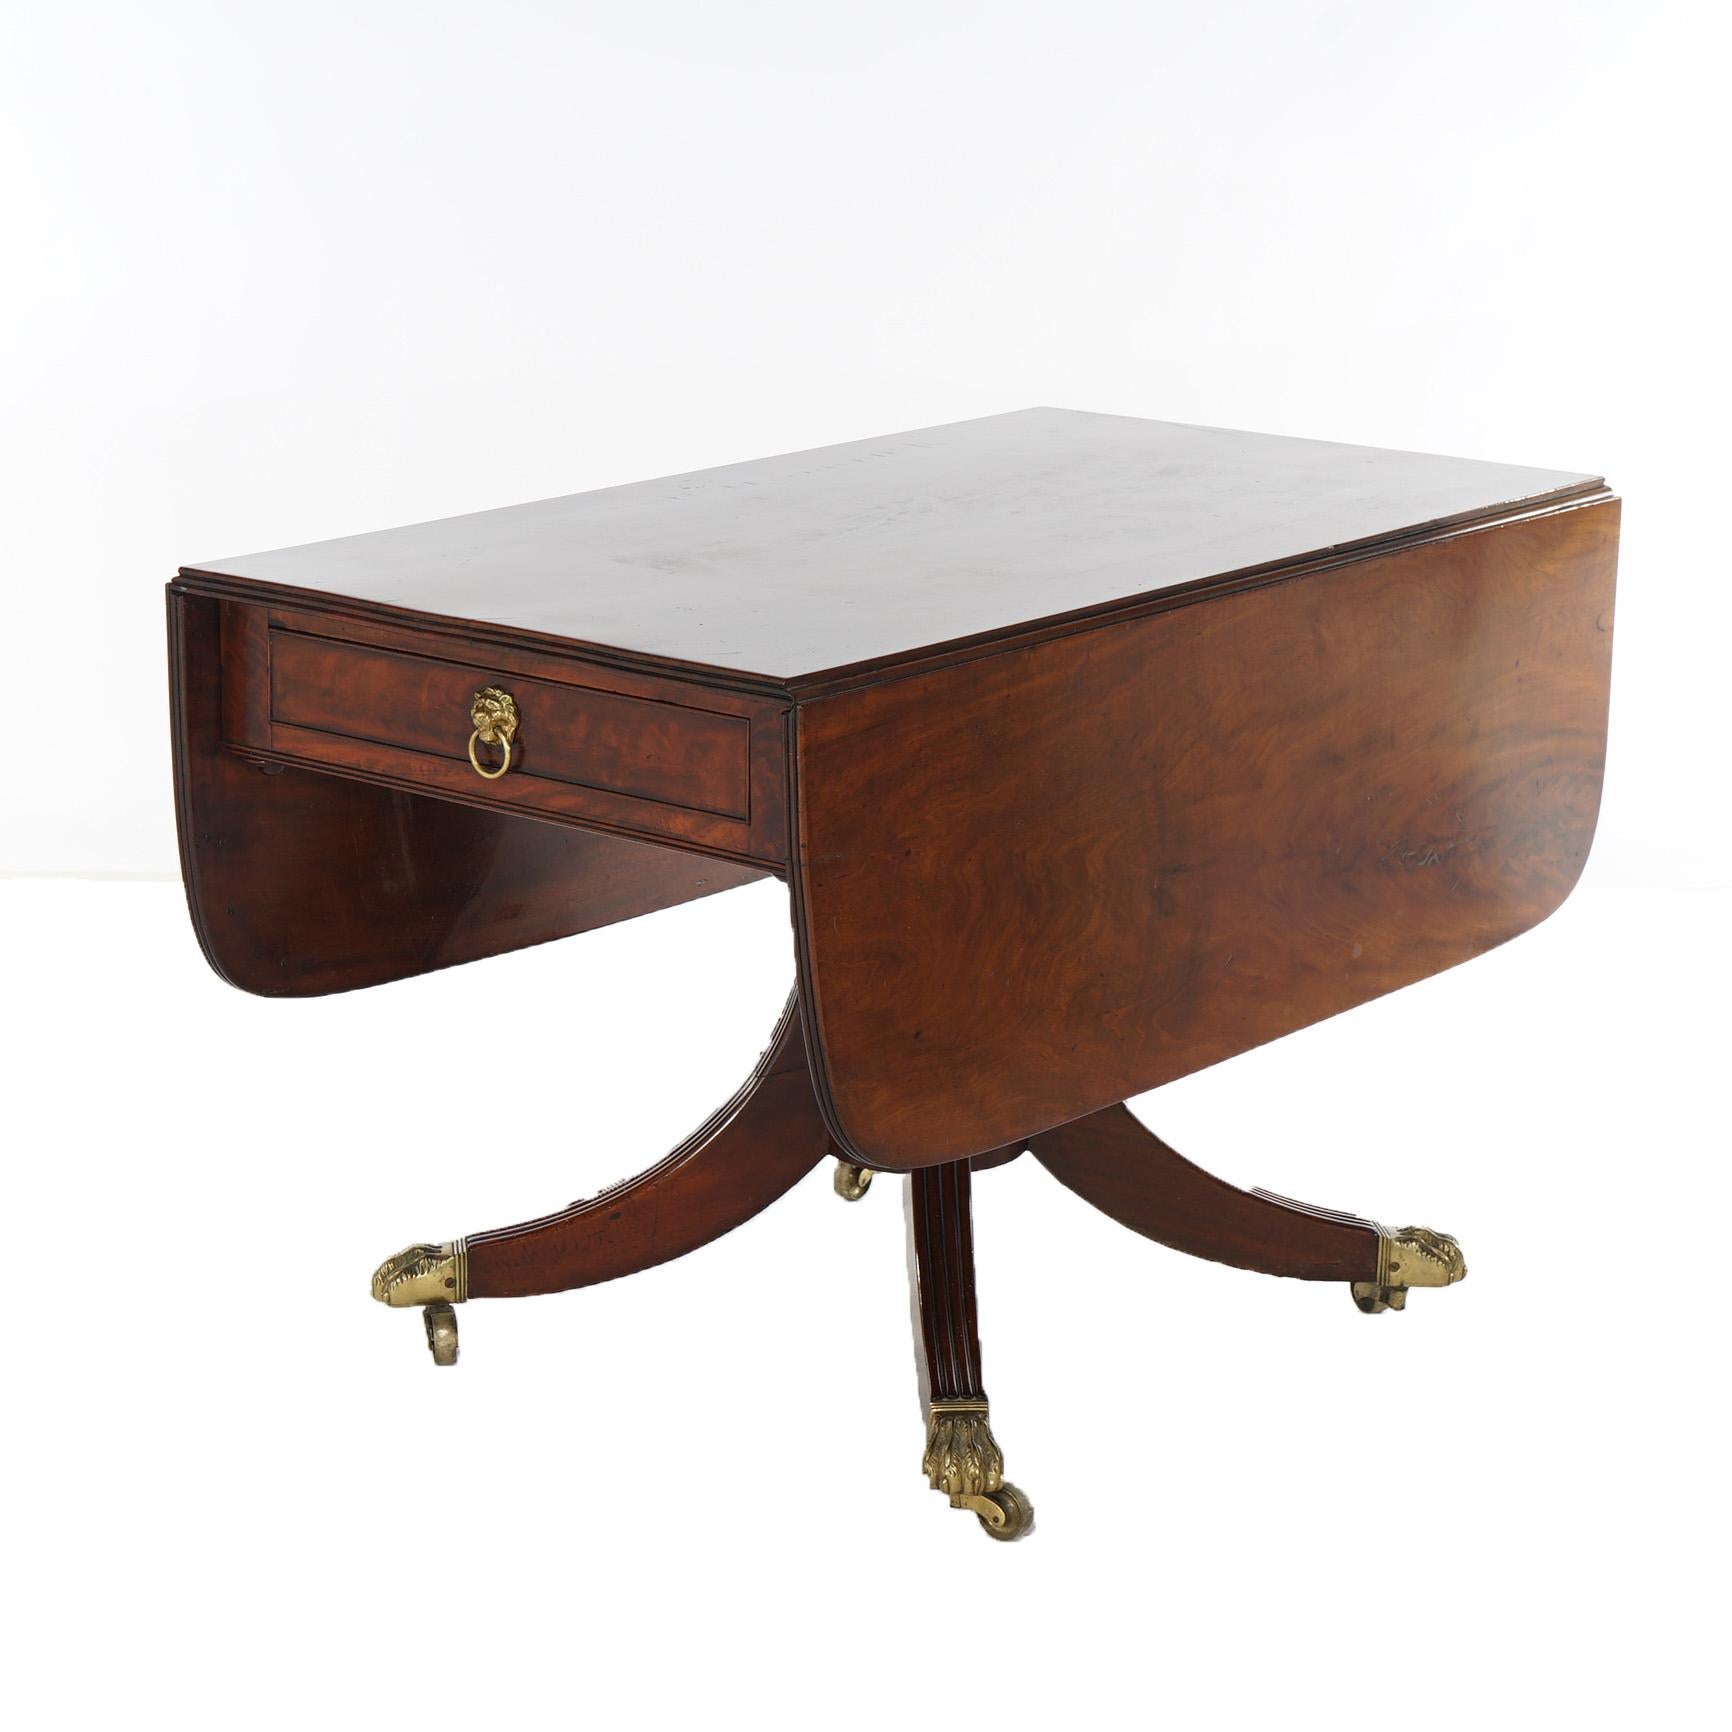 Antique George III Flame Mahogany Drop Leaf Table with Brass Claw Feet C1820 For Sale 4